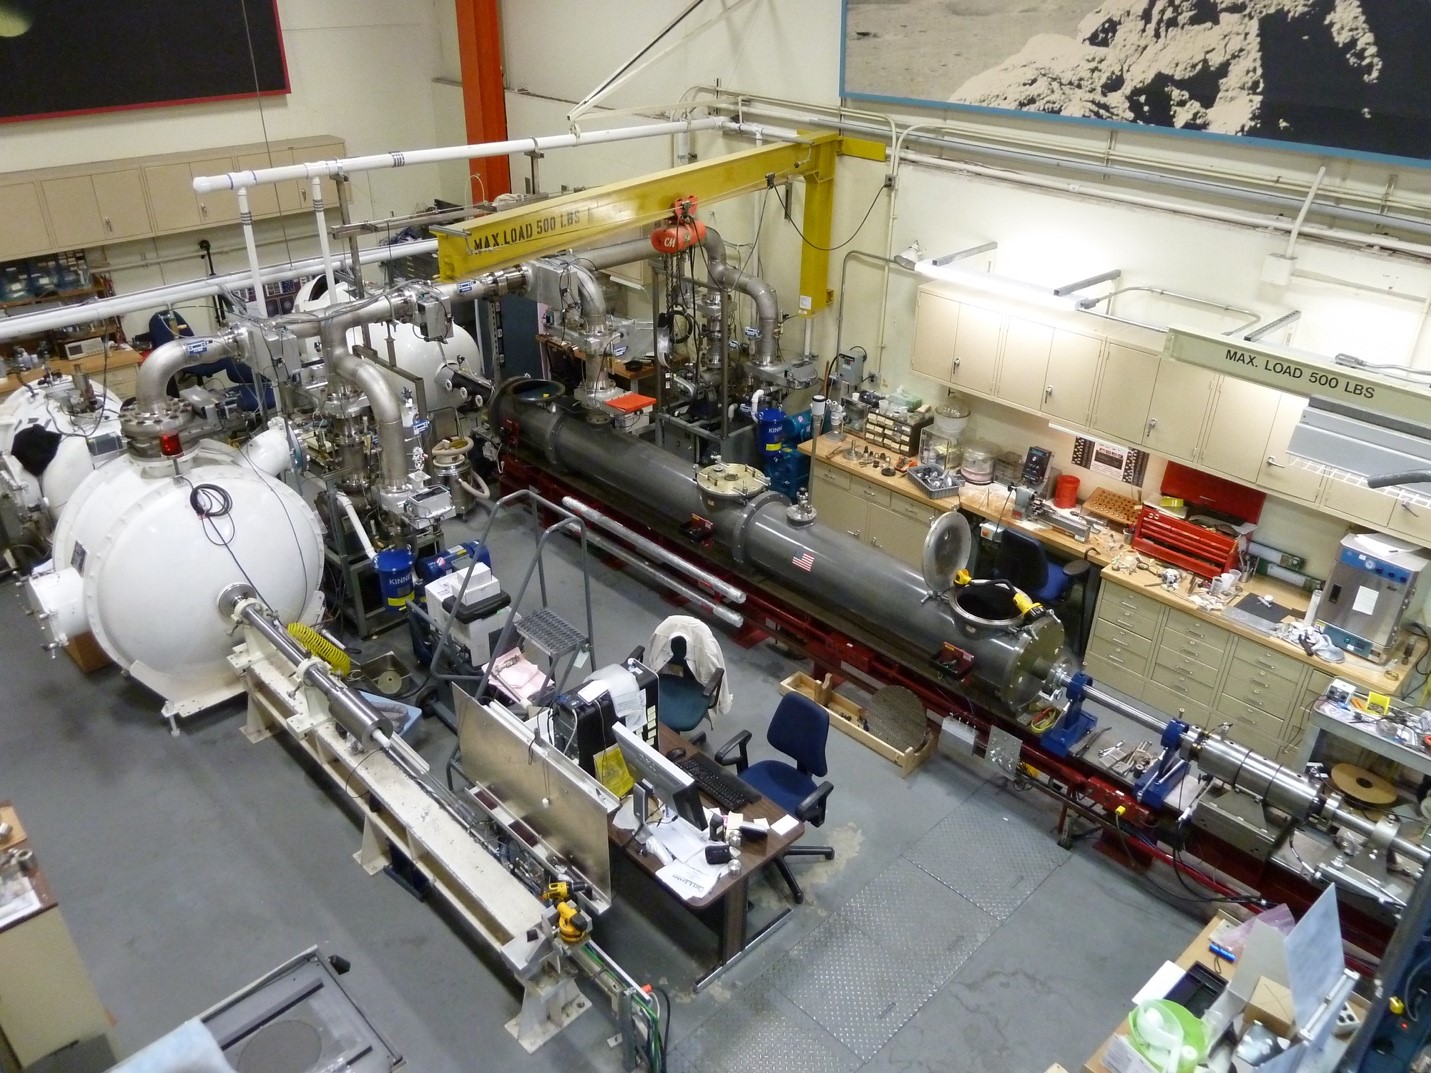 Inside the Experimental Impact Laboratory: Photograph of the EIL taken from the mezzanine floor that shows the flat-plate accelerator on the left and the light-gas gun on the right.